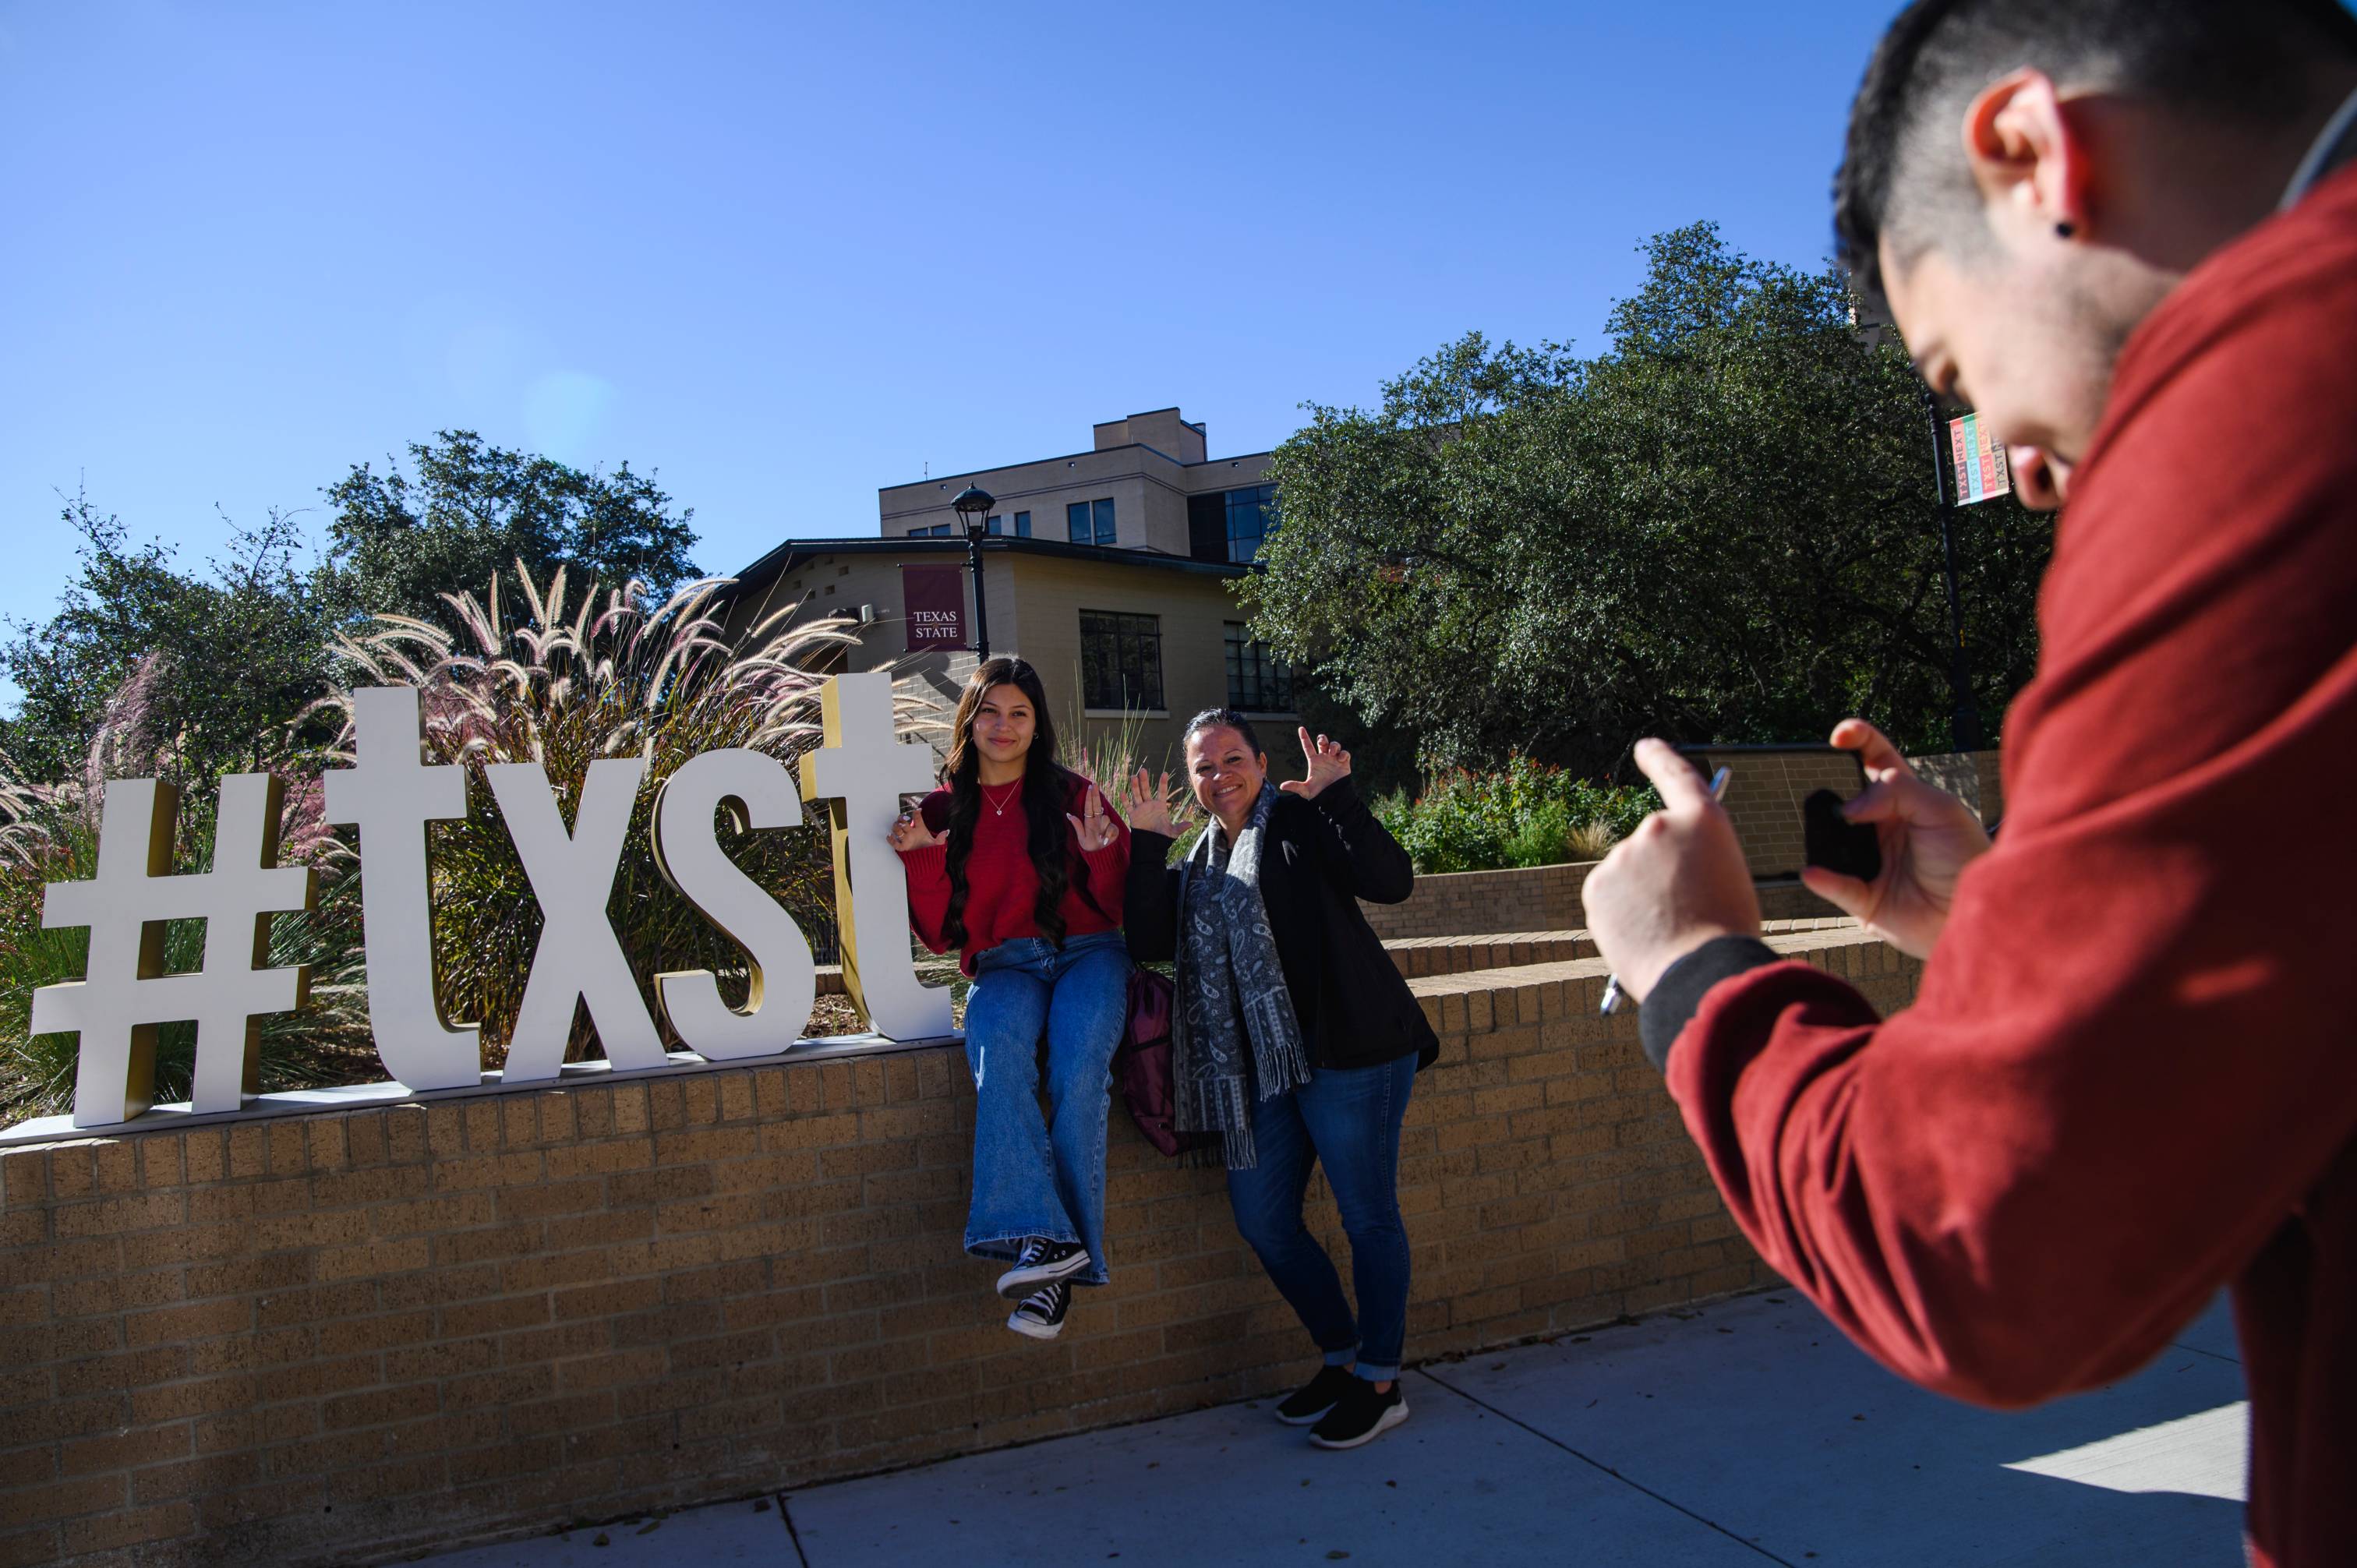 Student with their guardian sitting in front of the #txst sign getting their picture taken